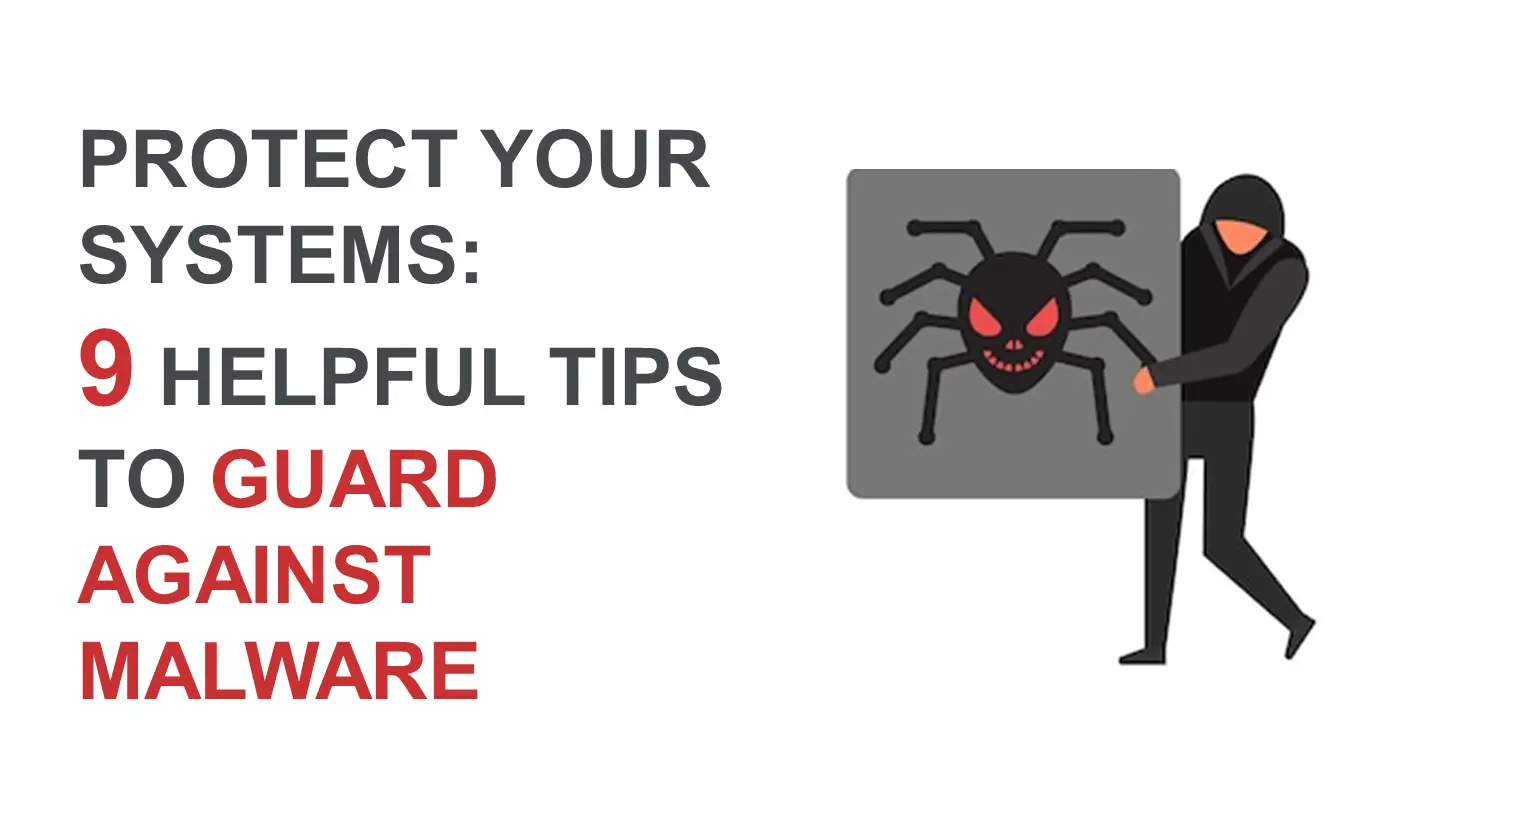 Protect Your Systems: 9 Helpful Tips to Guard Against Malware